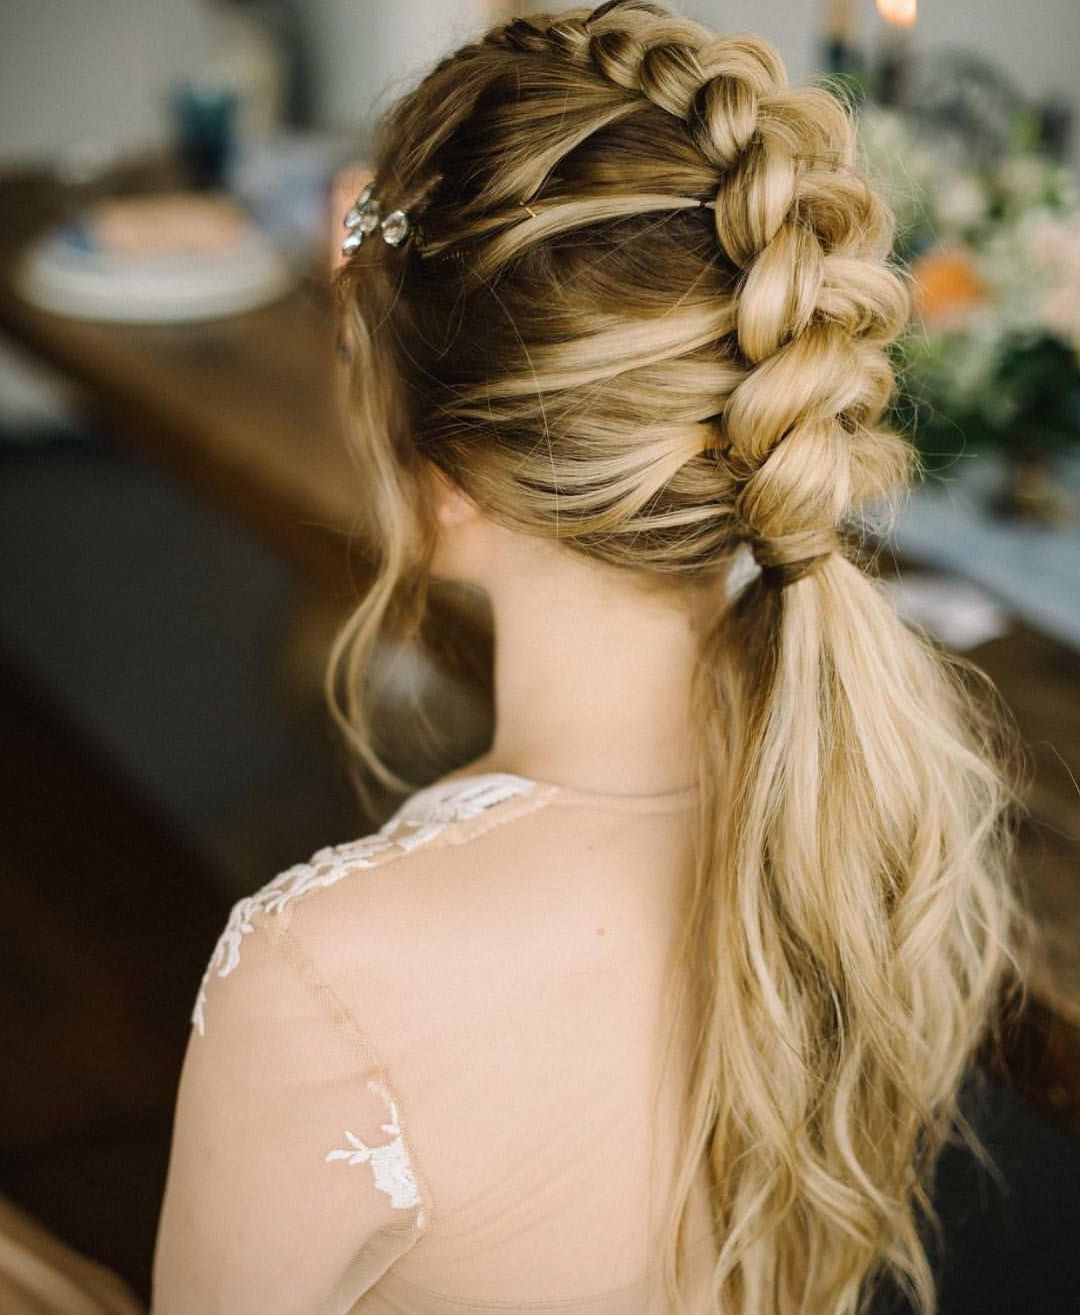 Widely Used Wedding Braided Hairstyles Within 10 Braided Hairstyles For Long Hair – Weddings, Festivals (View 7 of 20)